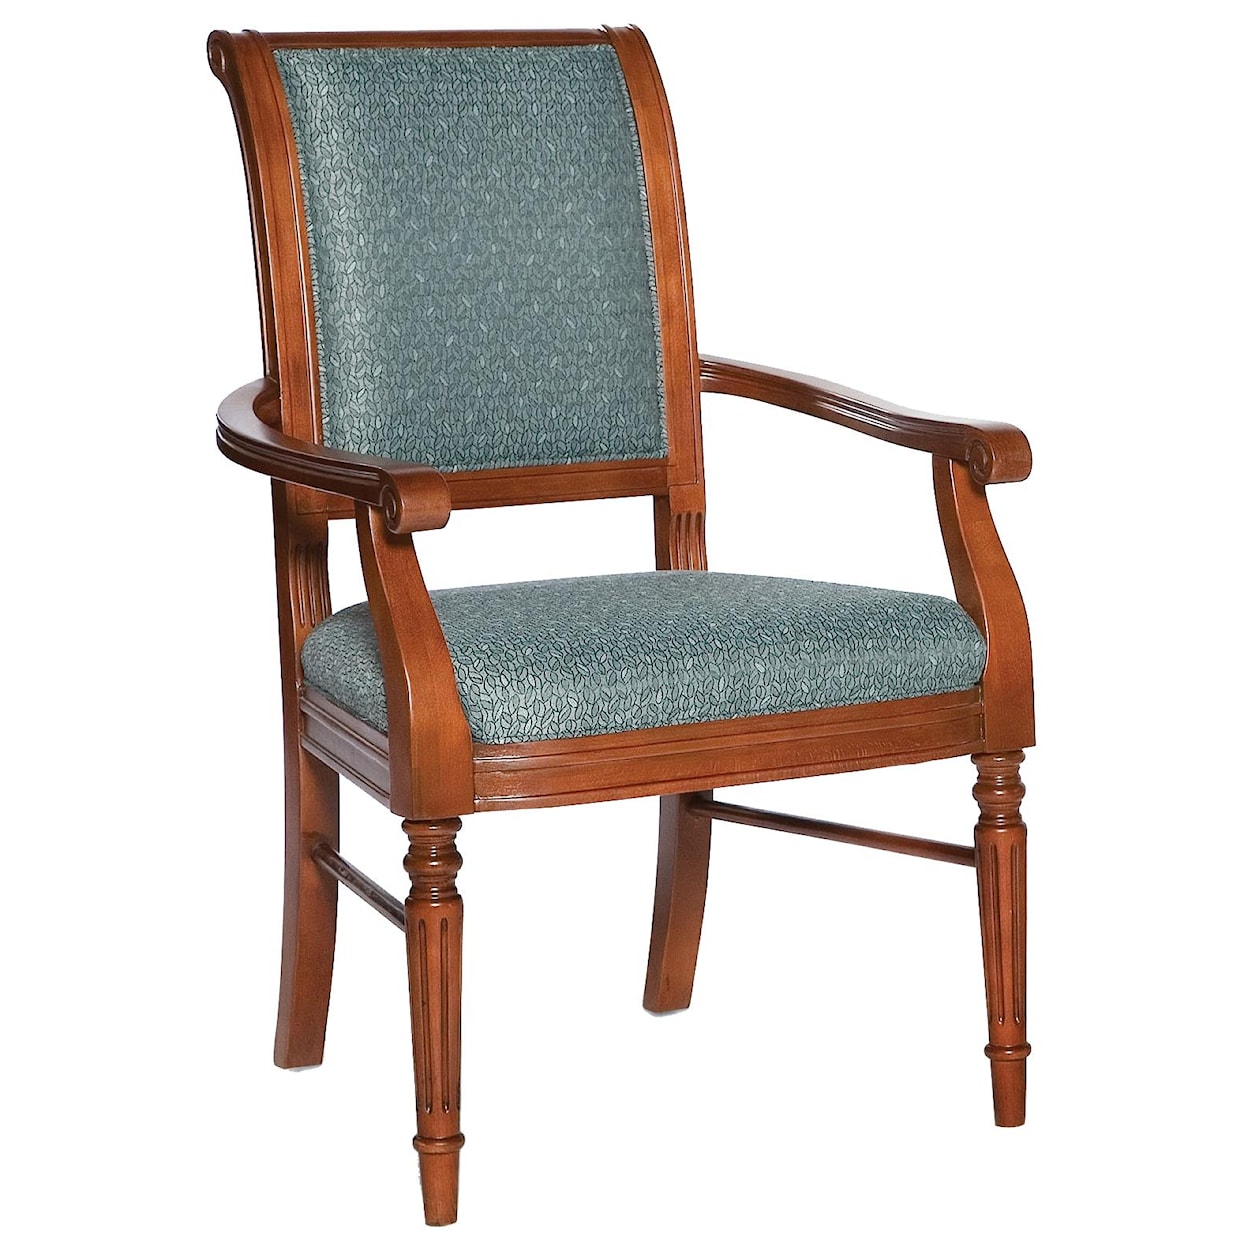 Fairfield Chairs Picture Frame Arm Chair